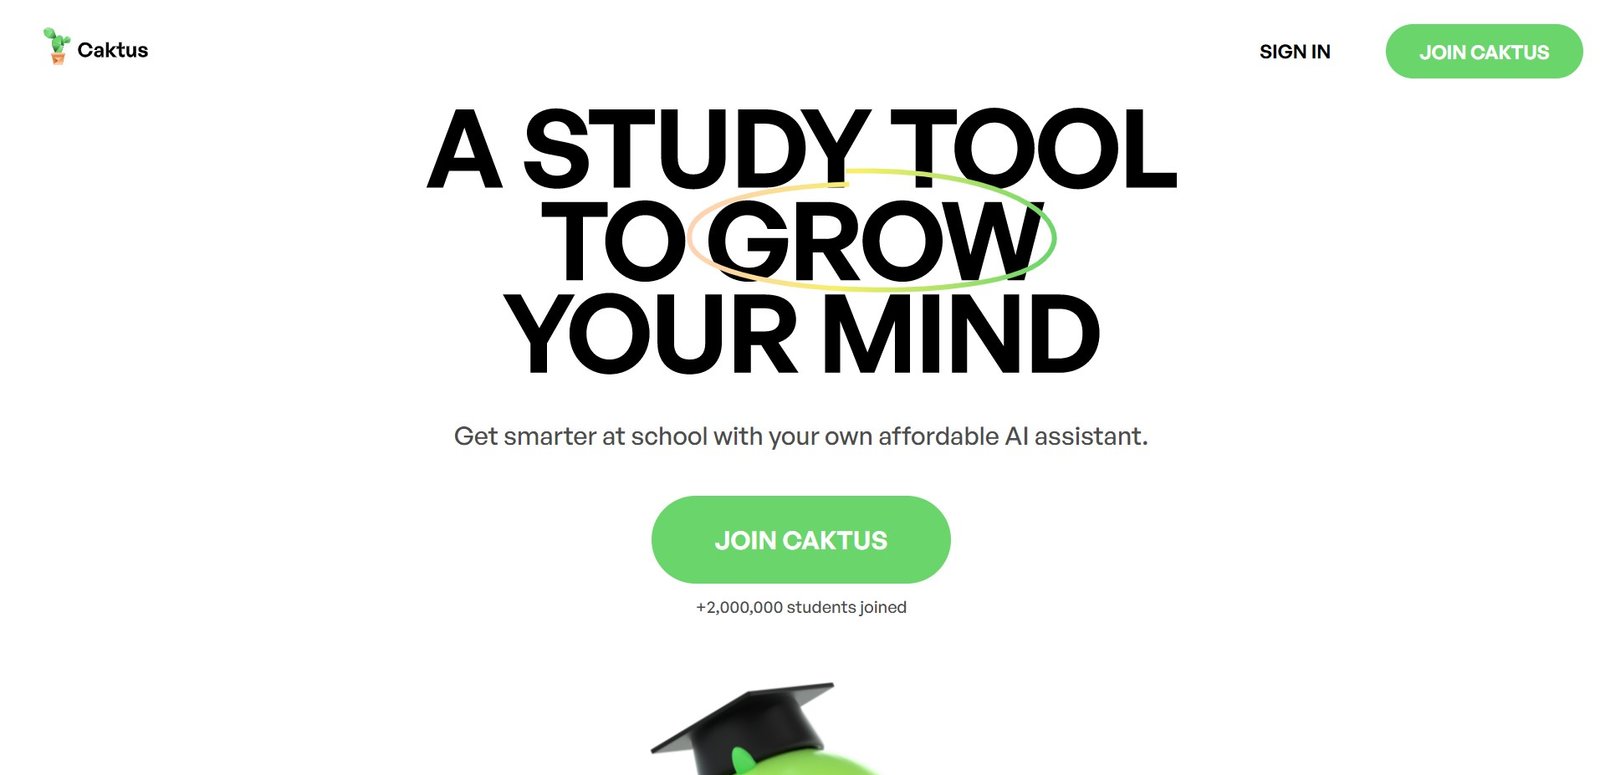 Caktus is an AI educational tool offering personalized support for coursework